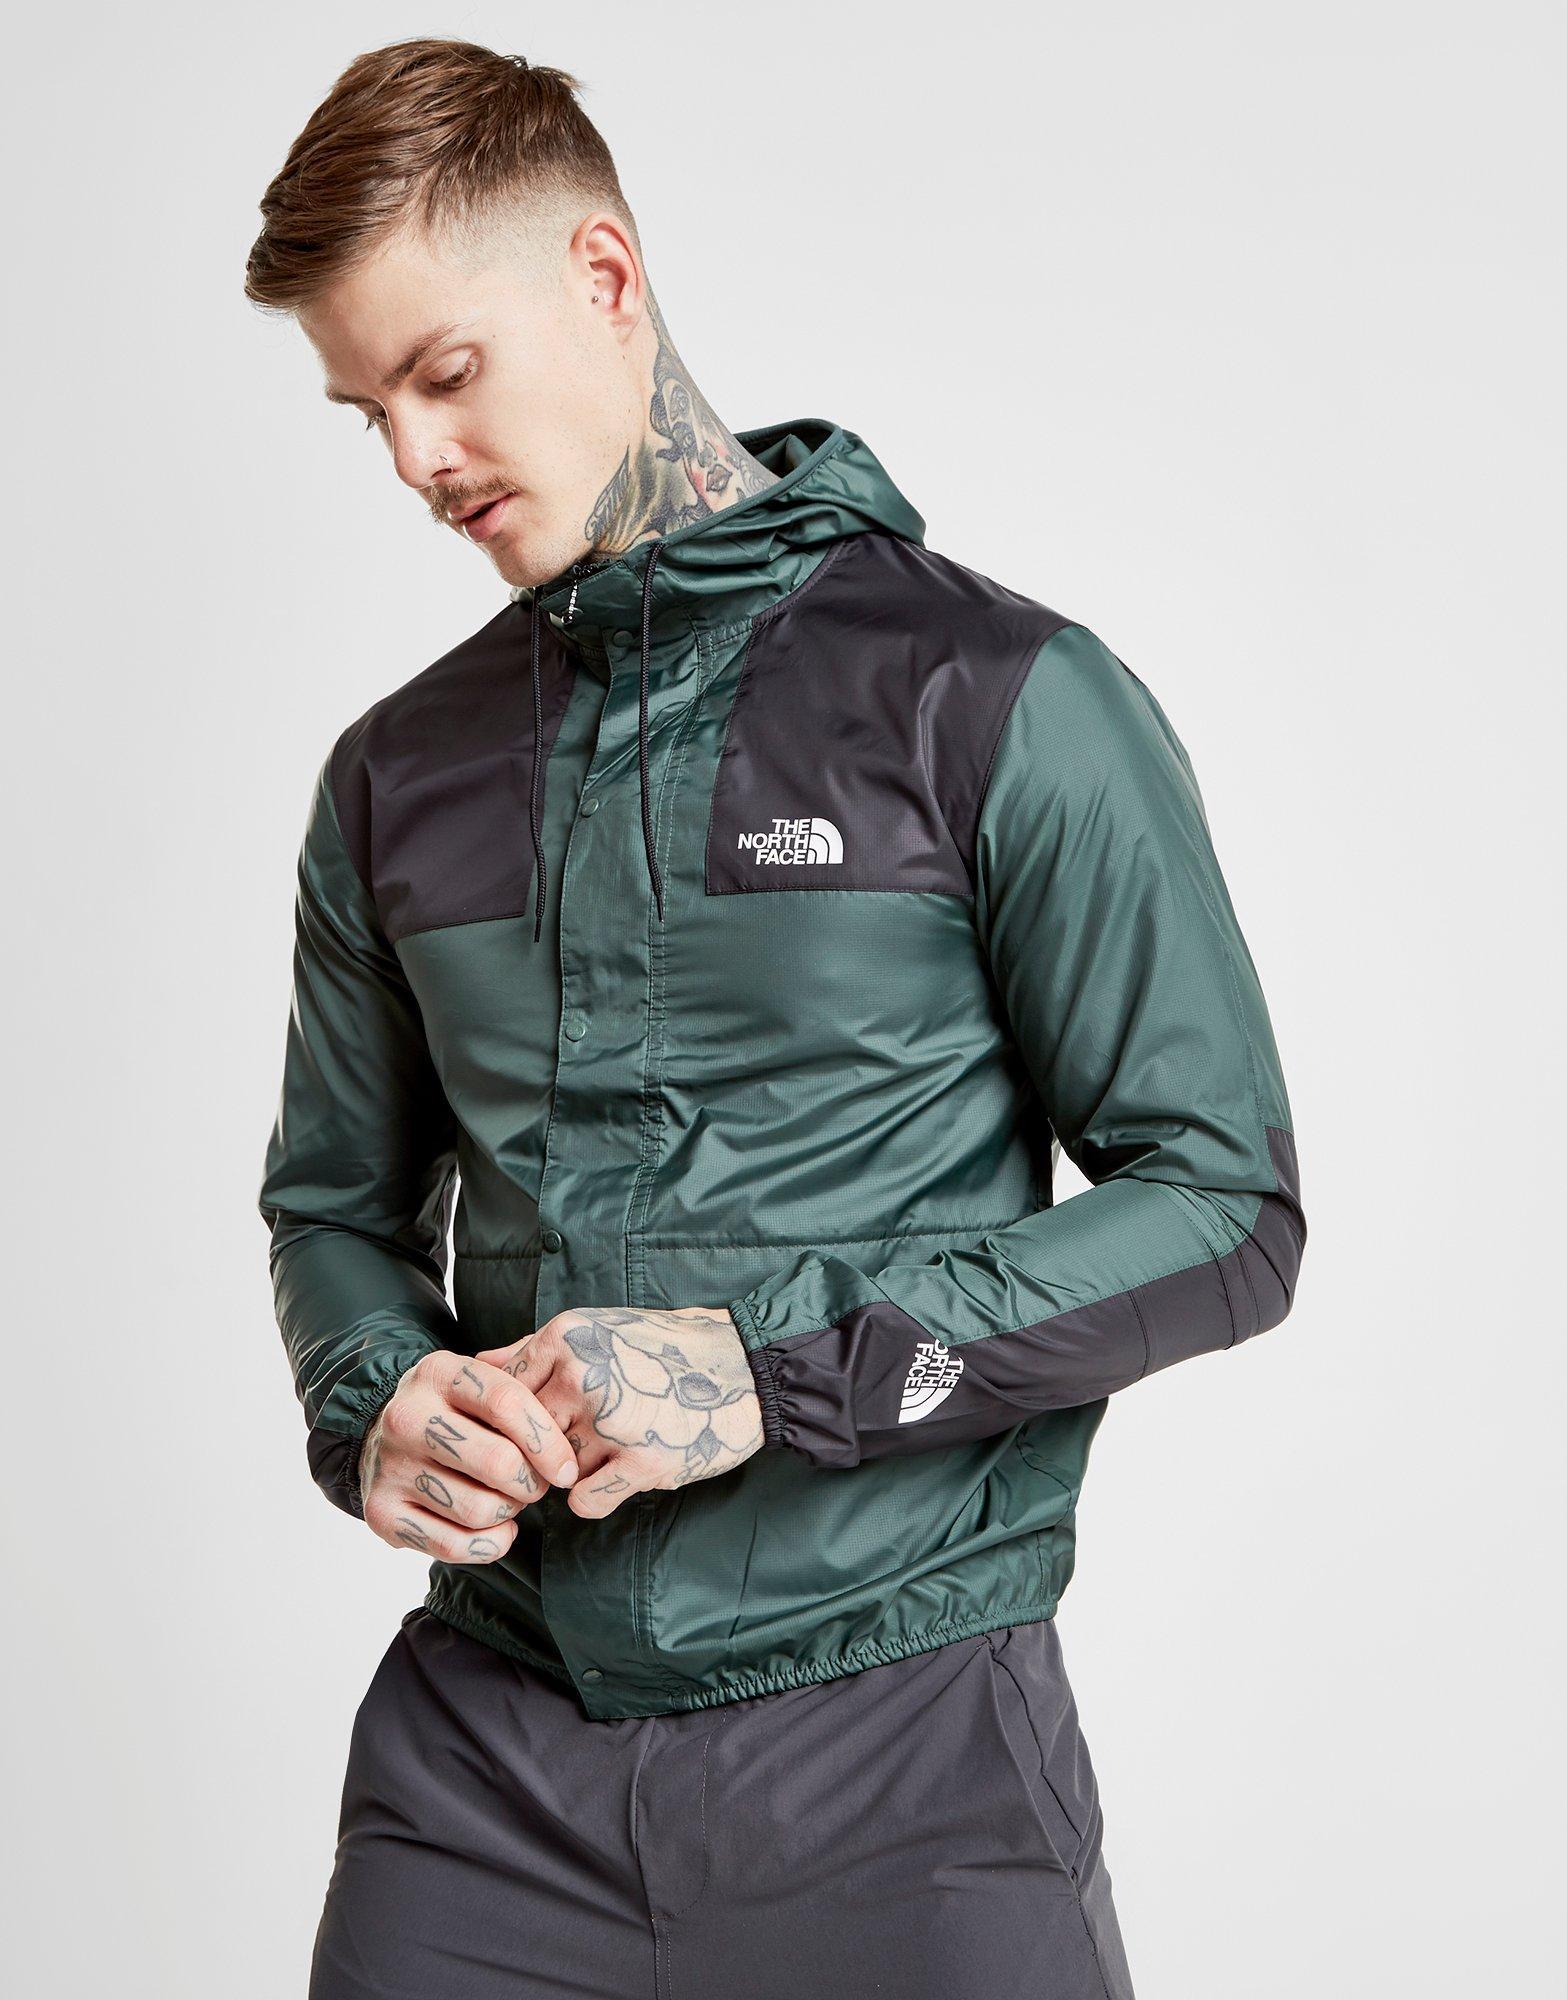 The North Face $1985 Jacket Jungle/ in 